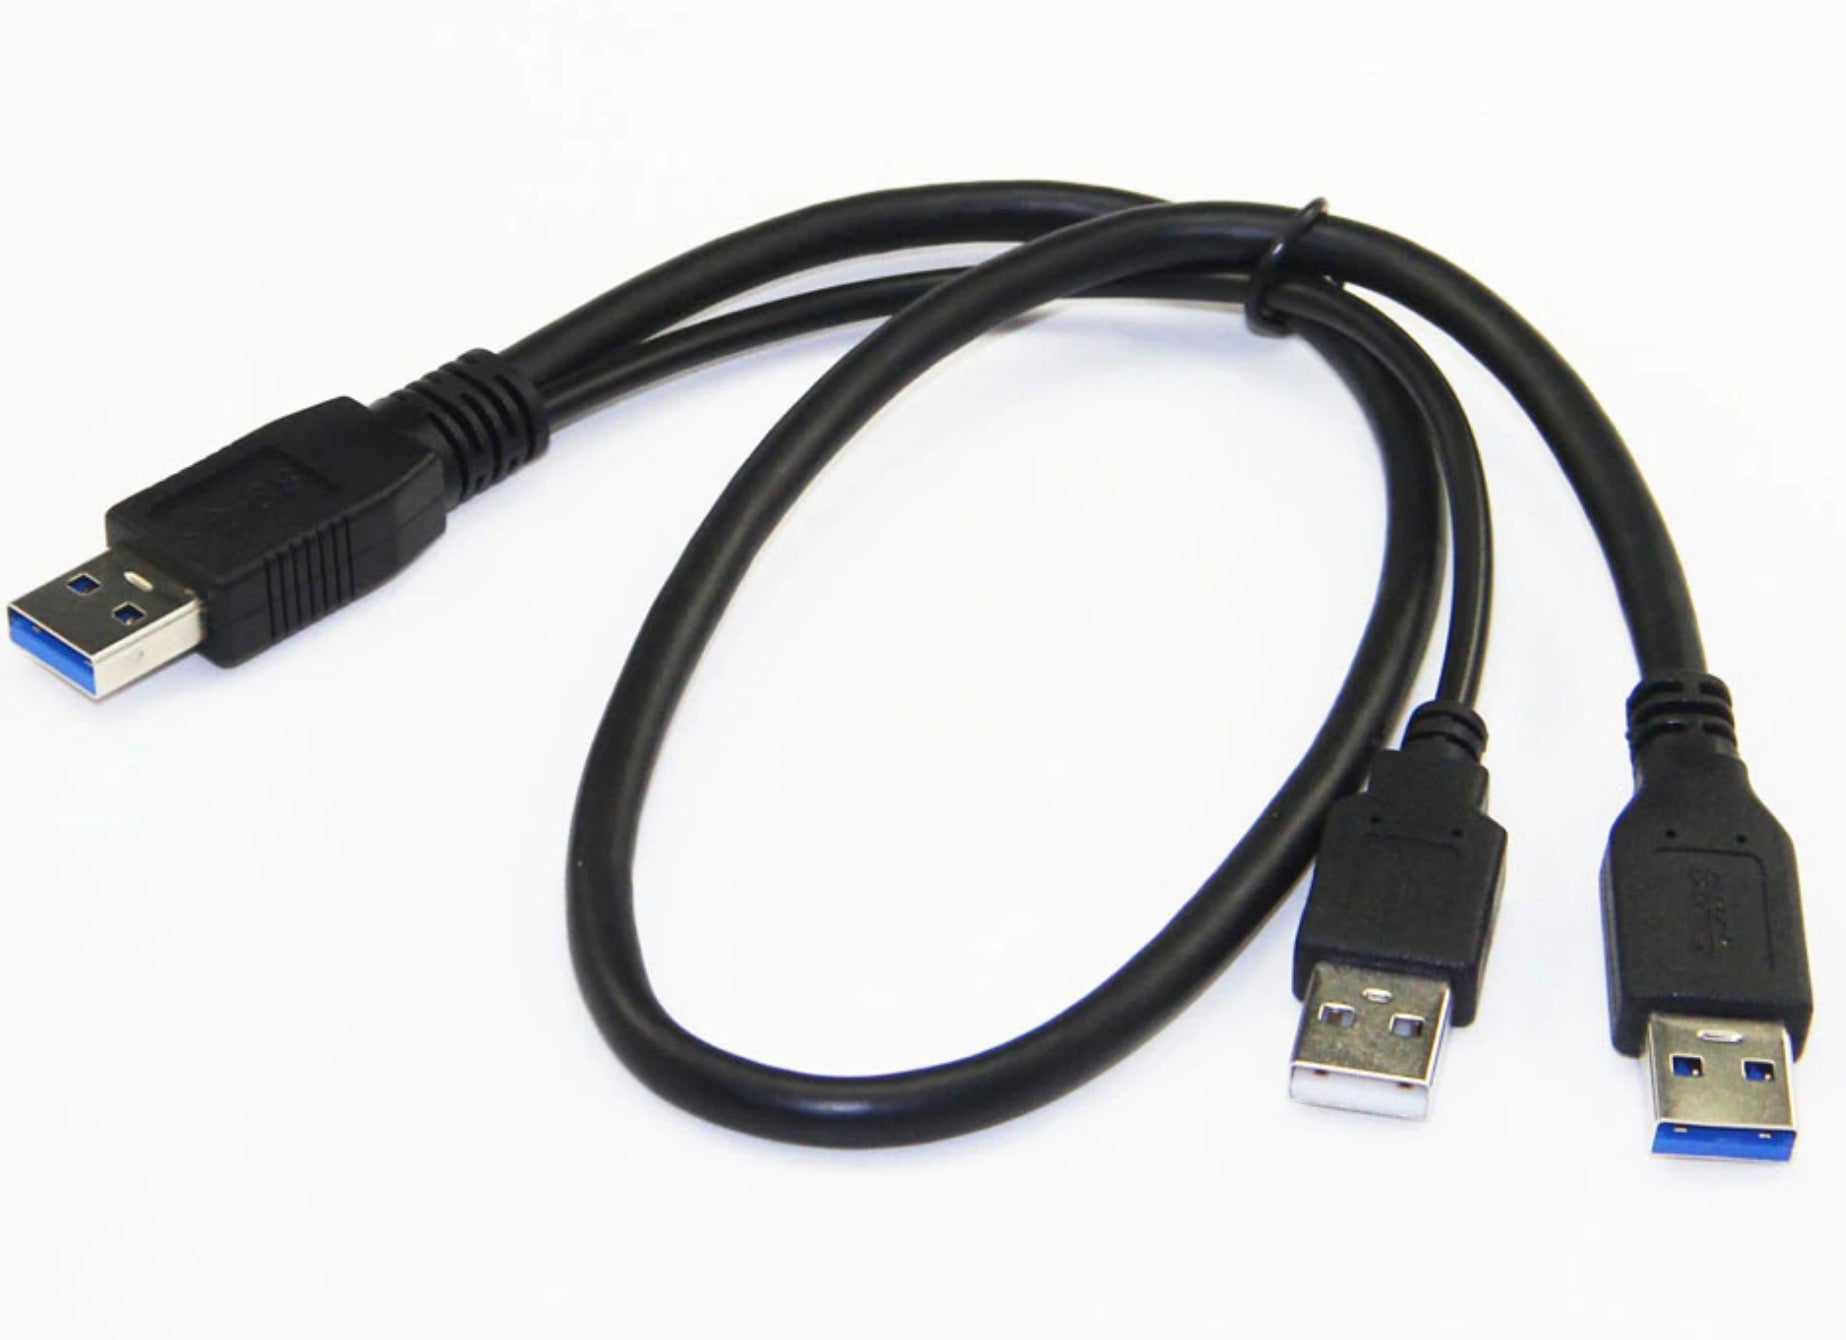 USB-A 3.0 Male to Male Data Cable + USB 2.0 Power Supply 0.5m